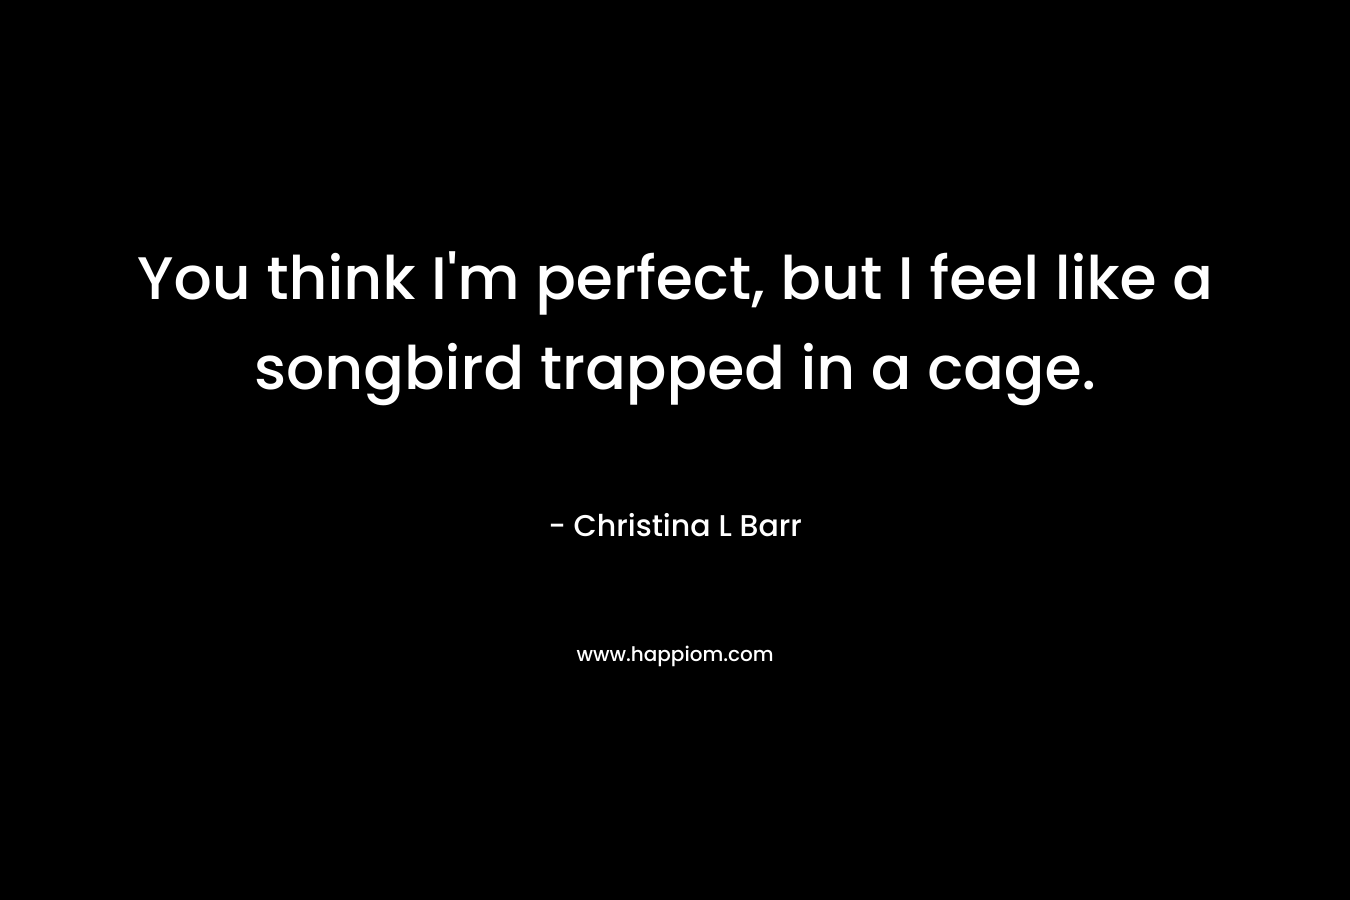 You think I’m perfect, but I feel like a songbird trapped in a cage. – Christina L Barr